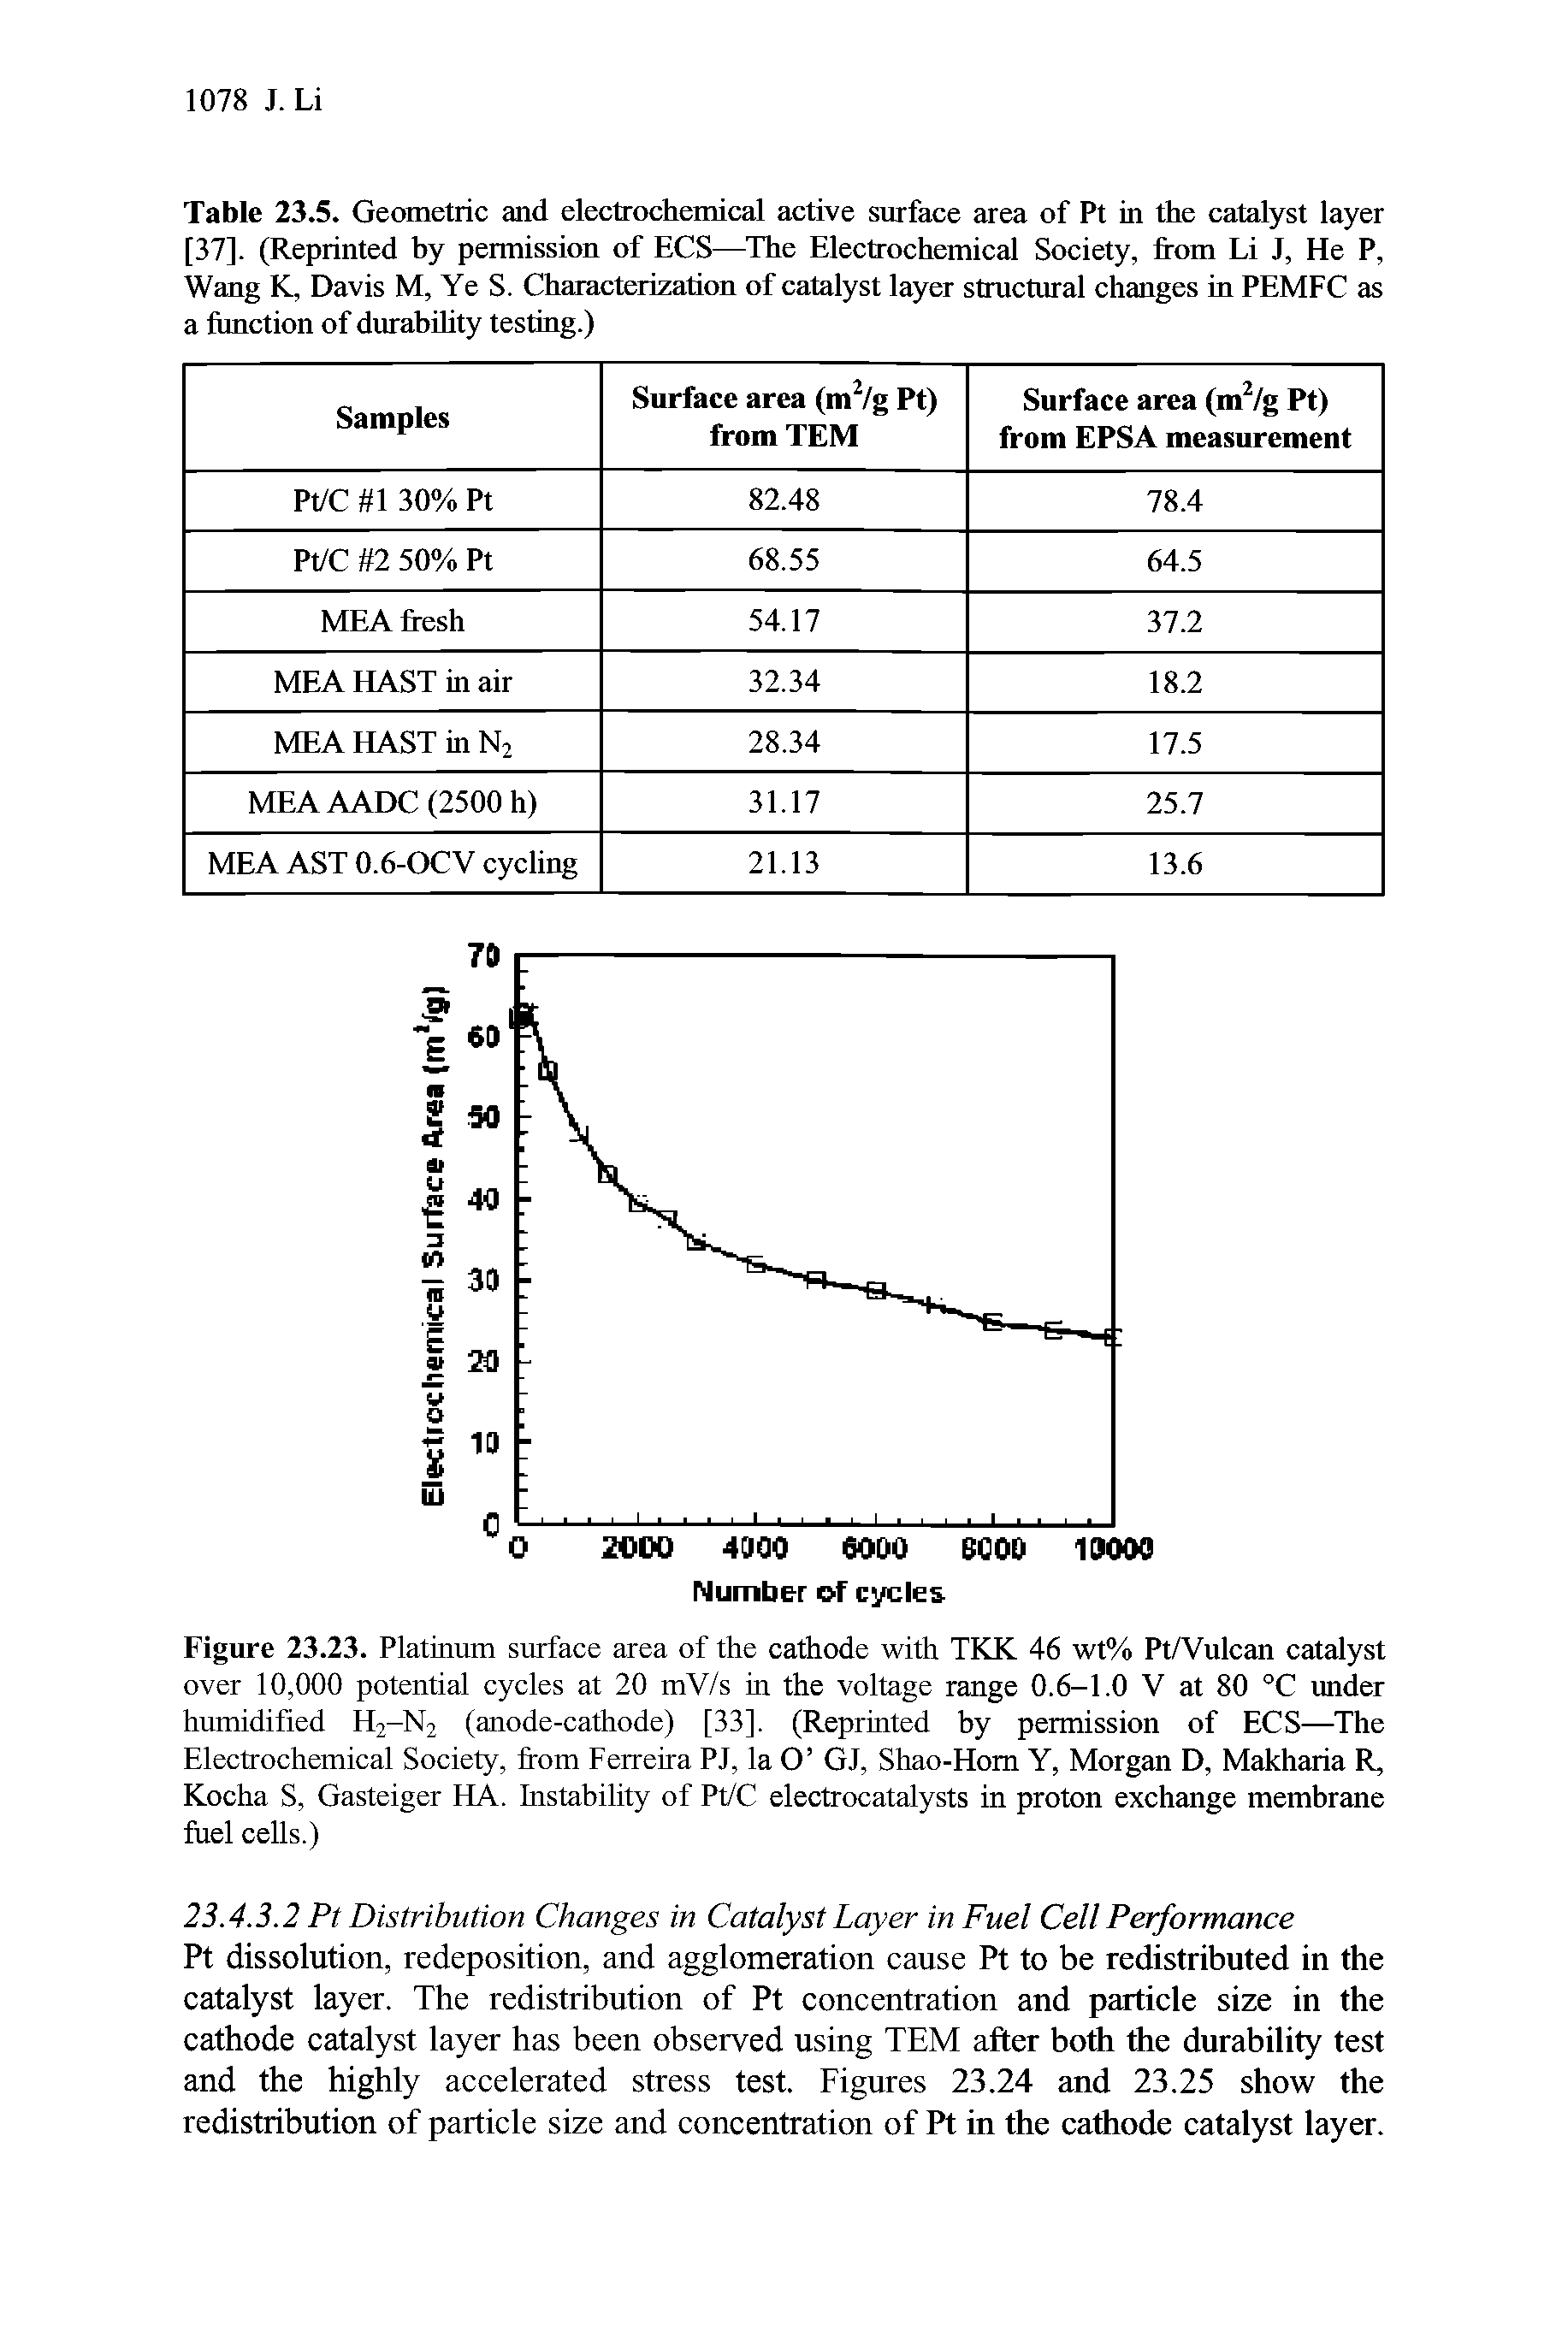 Figure 23.23. Platinum surface area of the cathode with TKK 46 wt% Pt/Vulcan catalyst over 10,000 potential cycles at 20 mV/s in the voltage range 0.6-1.0 V at 80 °C under humidified H2-N2 (anode-cathode) [33]. (Reprinted by permission of ECS— The Electrochemical Society, from Ferreira PJ, la O GJ, Shao-Hom Y, Morgan D, Makharia R, Kocha S, Gasteiger HA. Instability of PEC electrocatalysts in proton exchange membrane fuel cells.)...